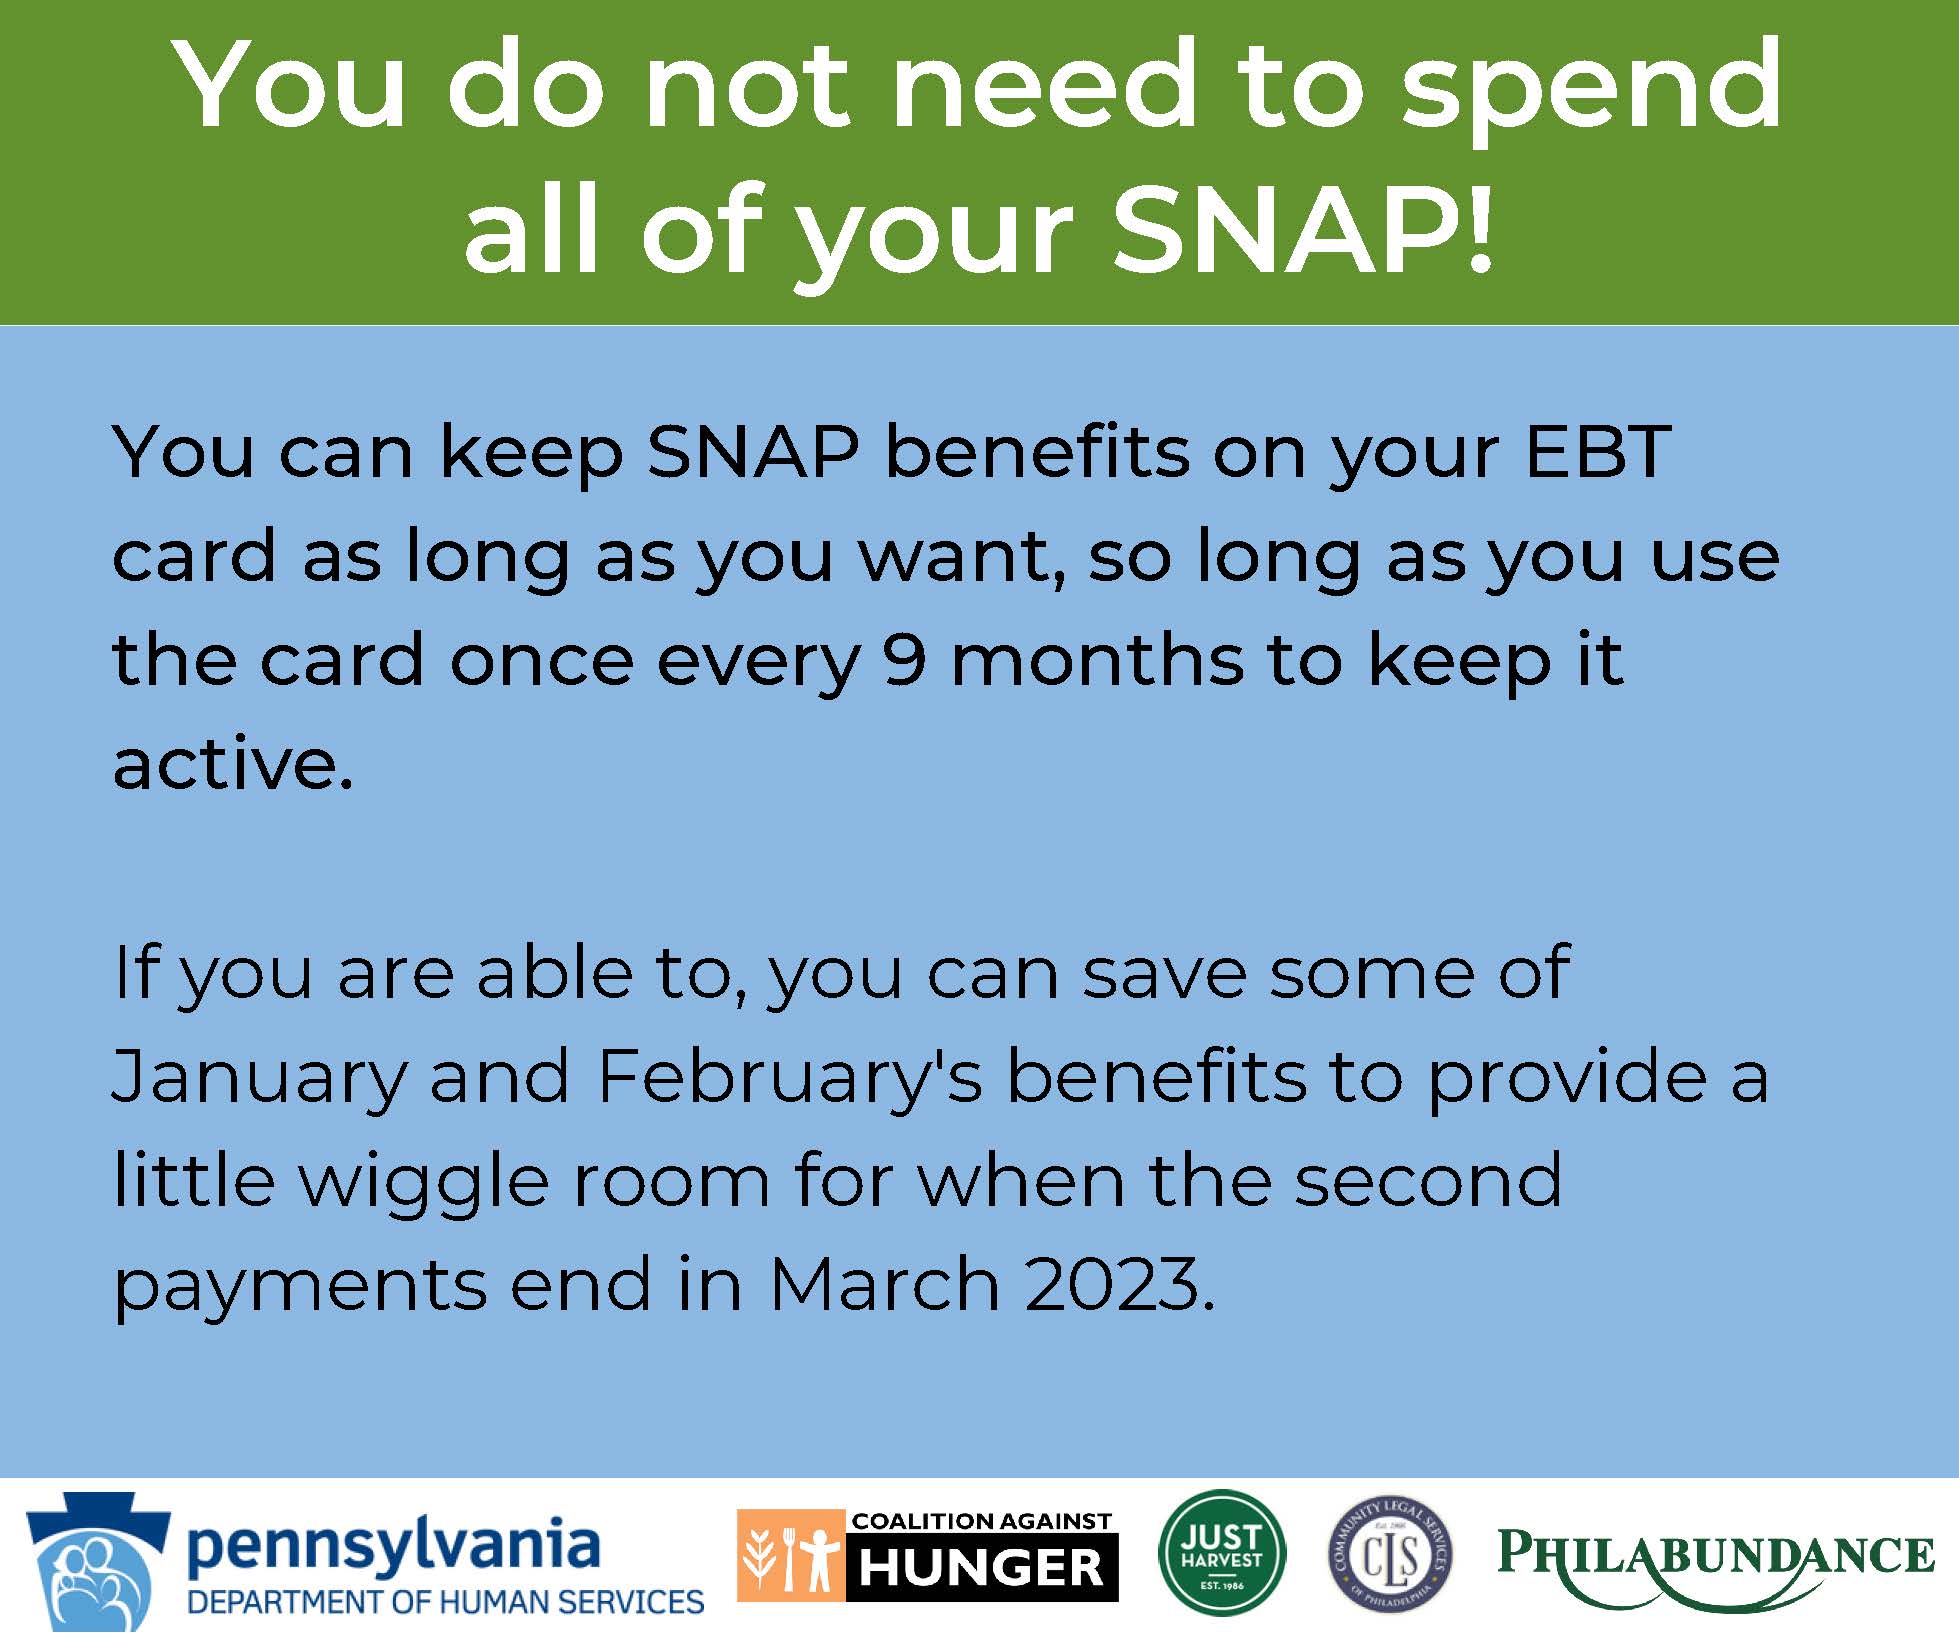 General Information Graphic You do not need to spend all of your SNAP! You can keep SNAP benefits on your EBT card as long as you want, so long as you use the card once every 9 months to keep it active. If you are able to, you can save some of January and February's benefits to provide a little wiggle room for when the second payments end in March 2023.